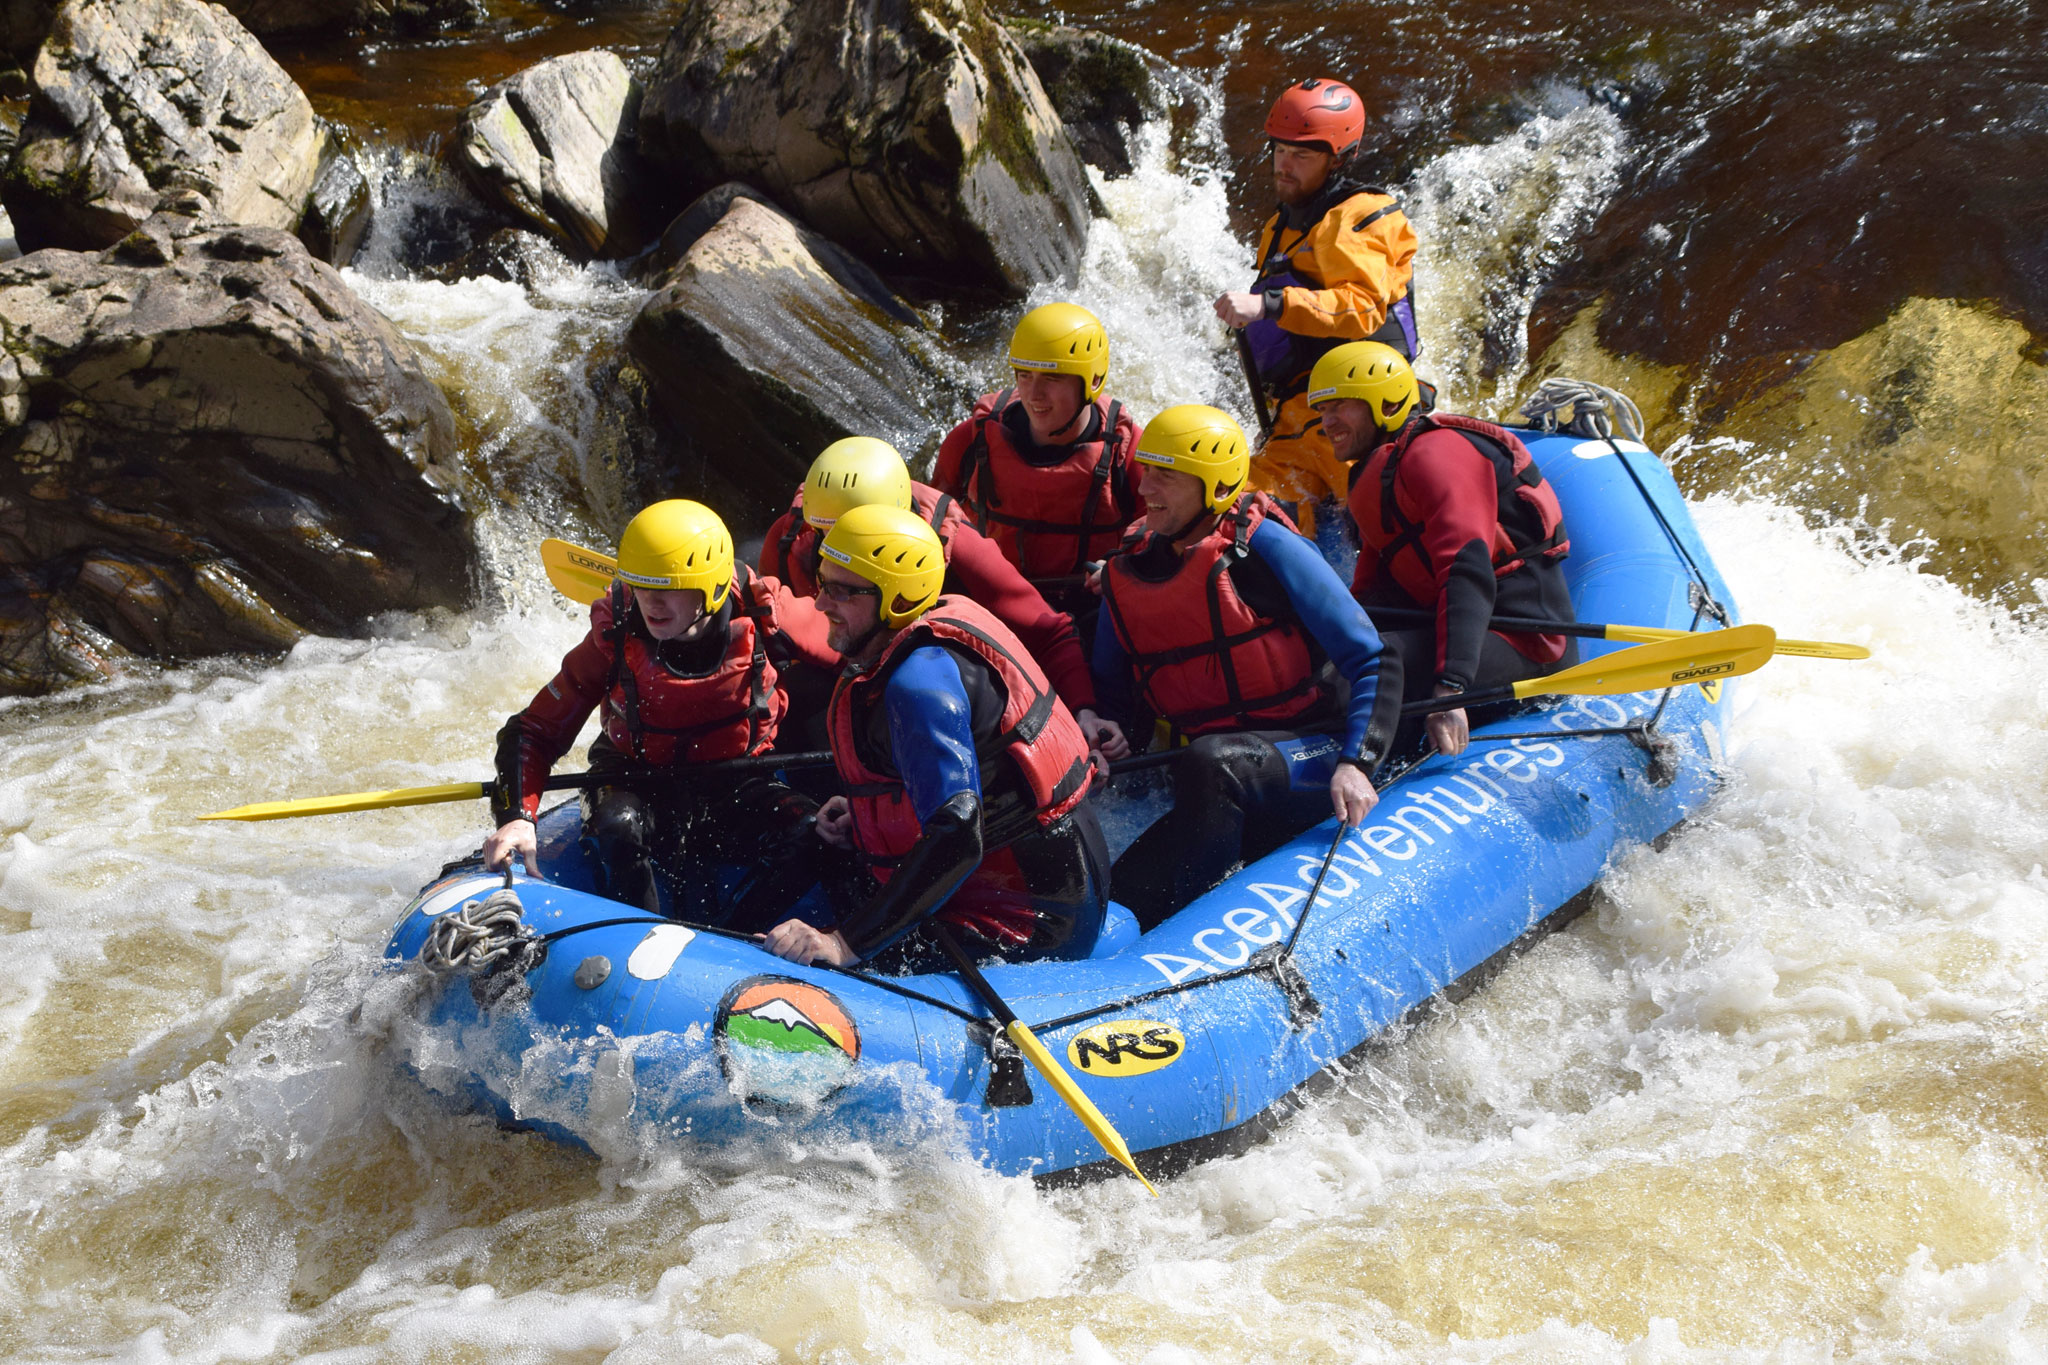 From Gorge Walking to White Water Rafting: Watersports in the Cairngorms National Park